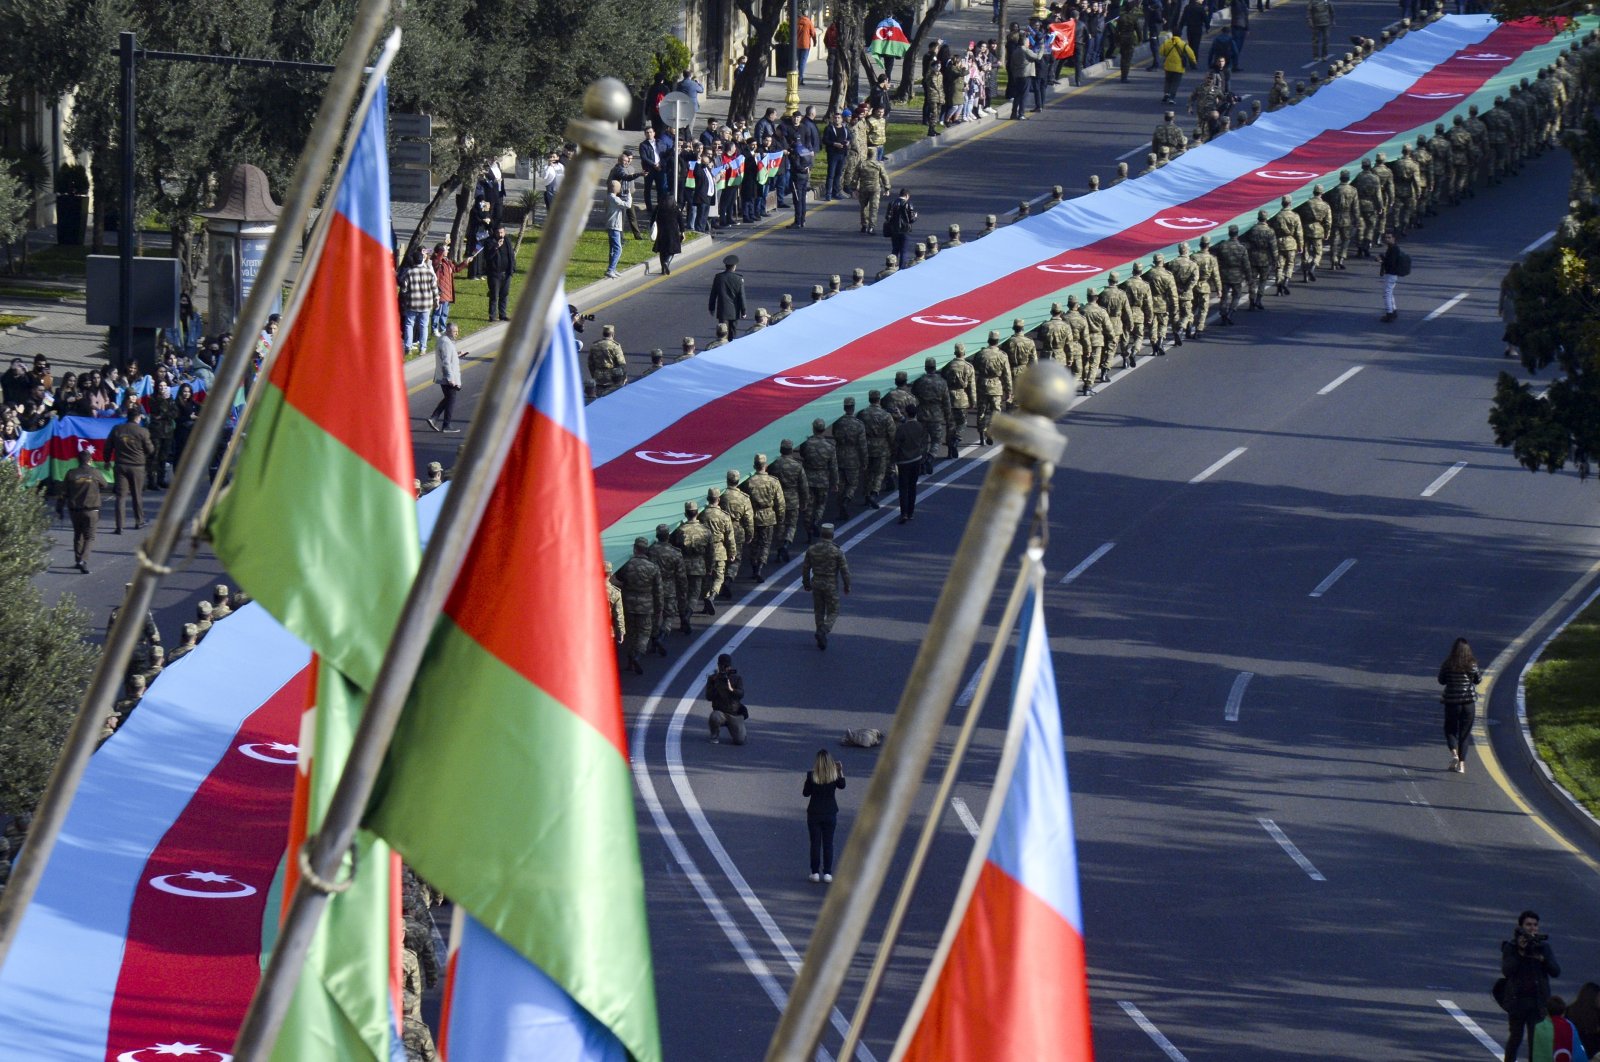 Soldiers carry a 440-meter-long (1,444-foot) Azerbaijan national flag to celebrate the Victory Day in Baku, Azerbaijan, Monday, Nov. 8, 2021. The celebrations mark the one-year anniversary of Azerbaijan's victory in six weeks of heavy fighting over Nagorno-Karabakh. (AP Photo)